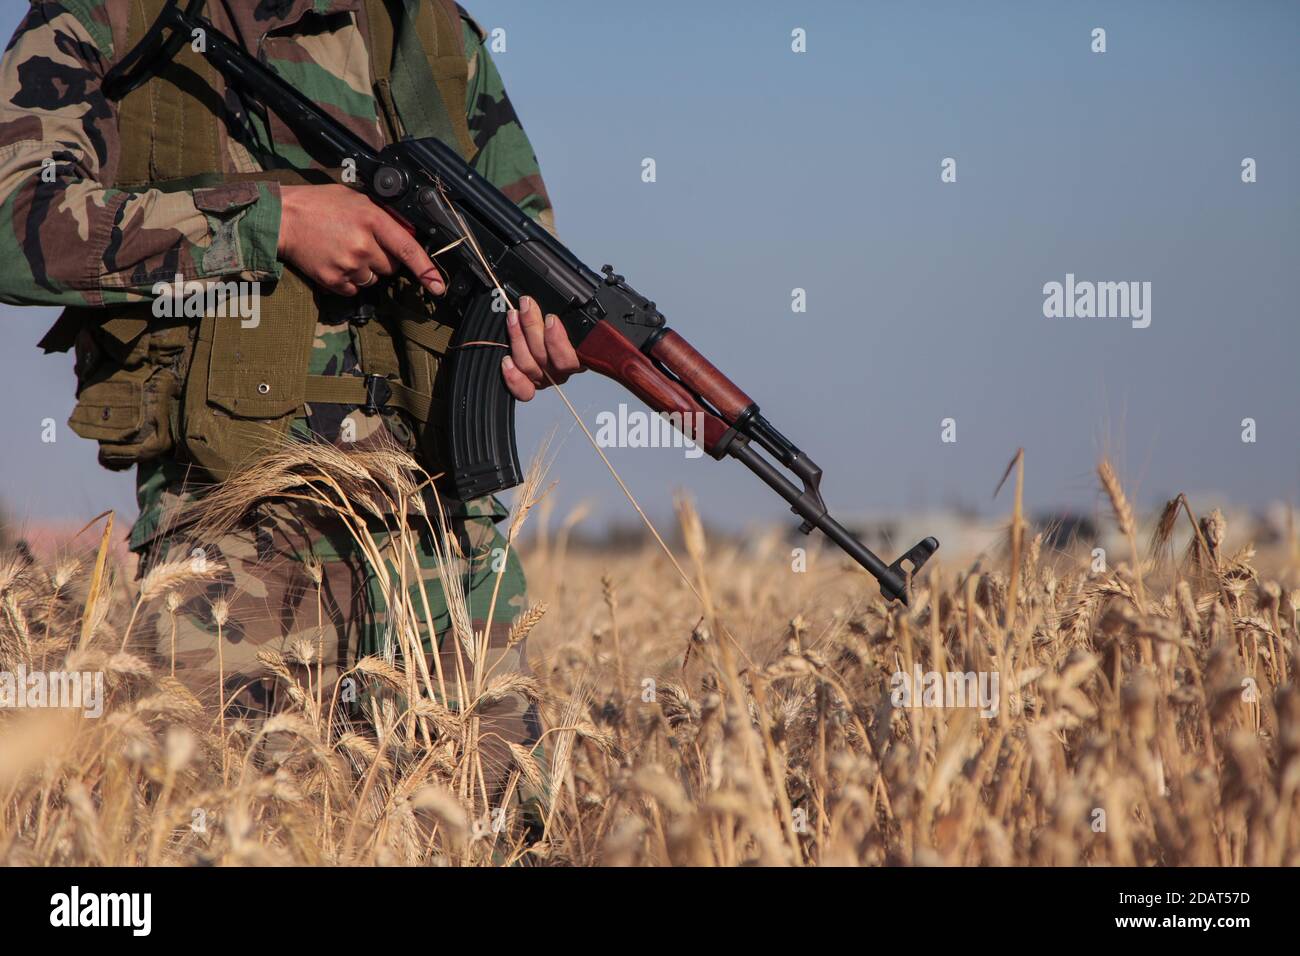 North Homs, Syria 2017: Syrian Soldier Fighter Holding AKS Russian Machine Gun during Syrian Civil War Standing in an agricultural country wheat field Stock Photo